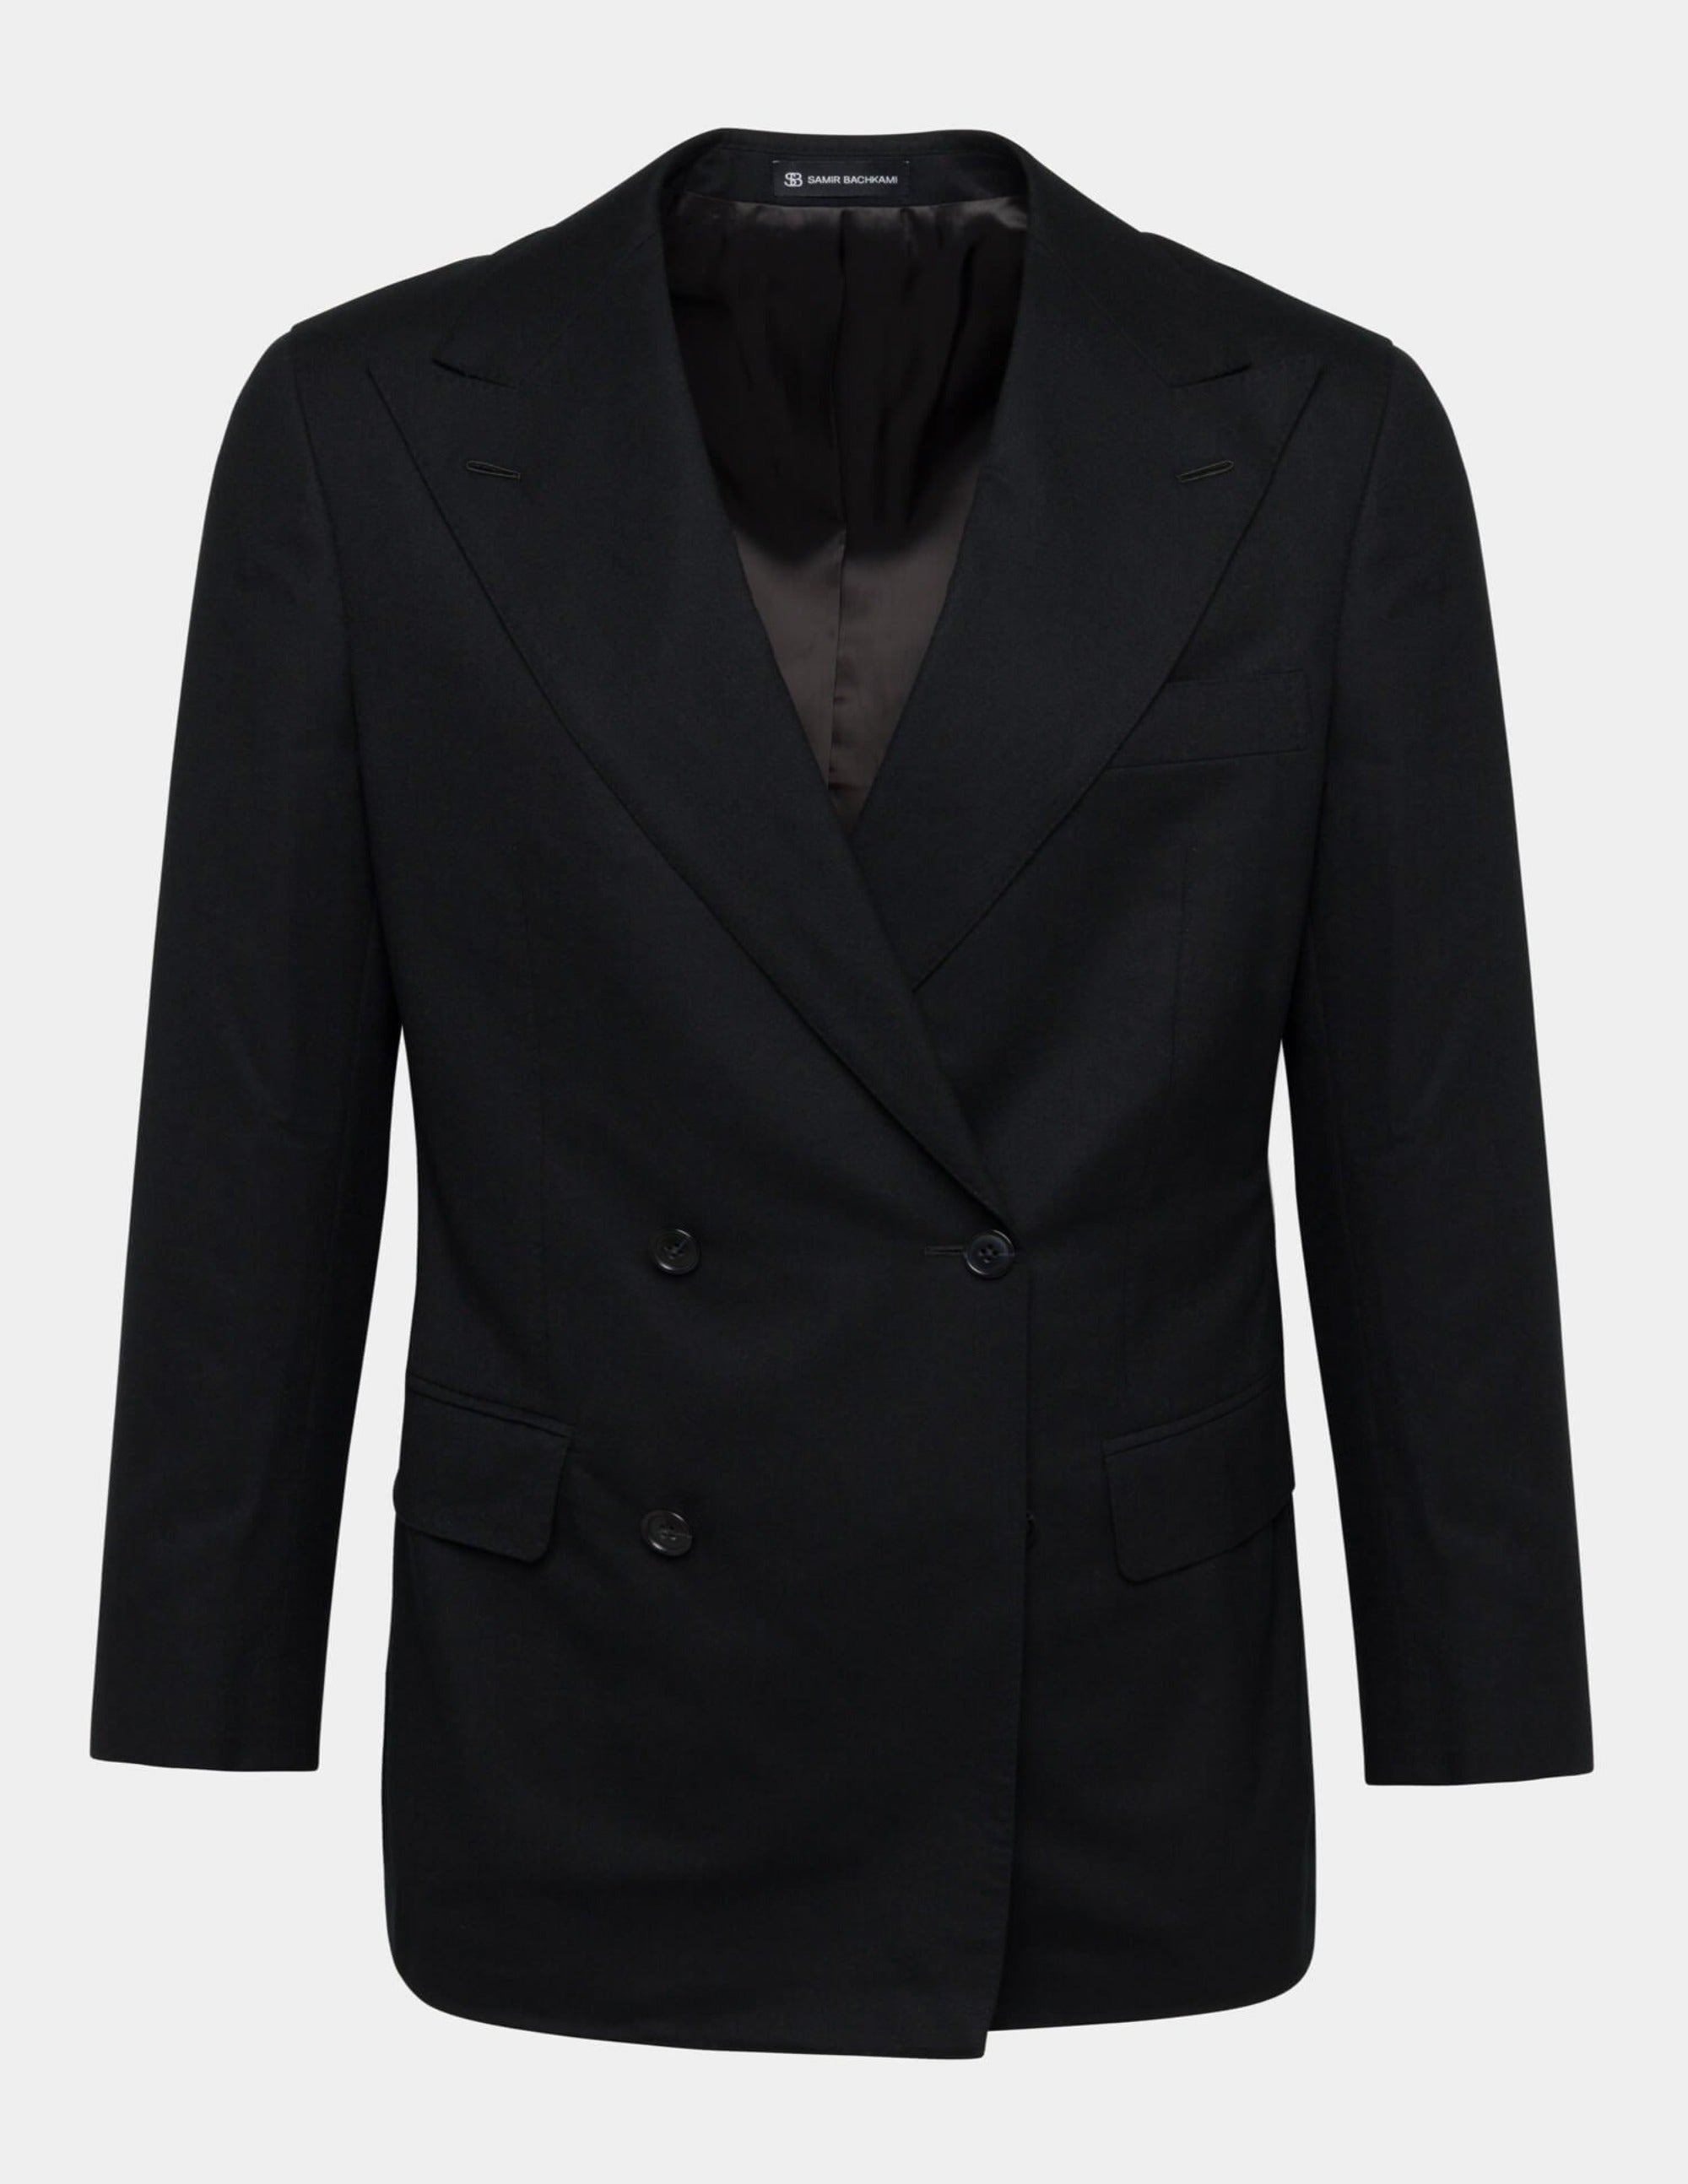 Black Wool Cashmere Double Breasted Suit